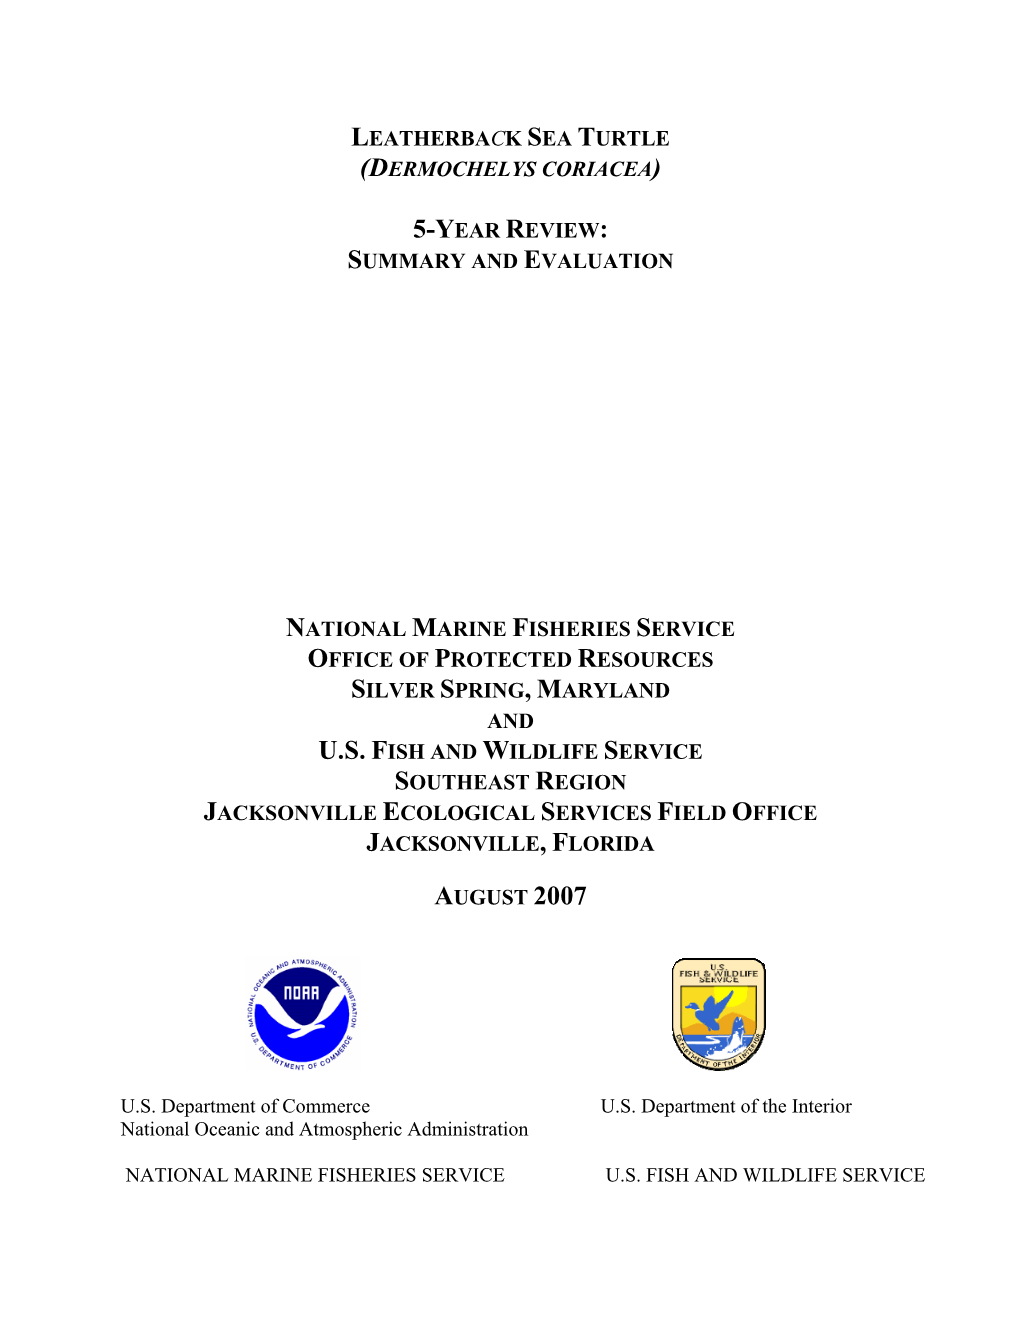 NMFS/FWS Leatherback Sea Turtle Five Year Review